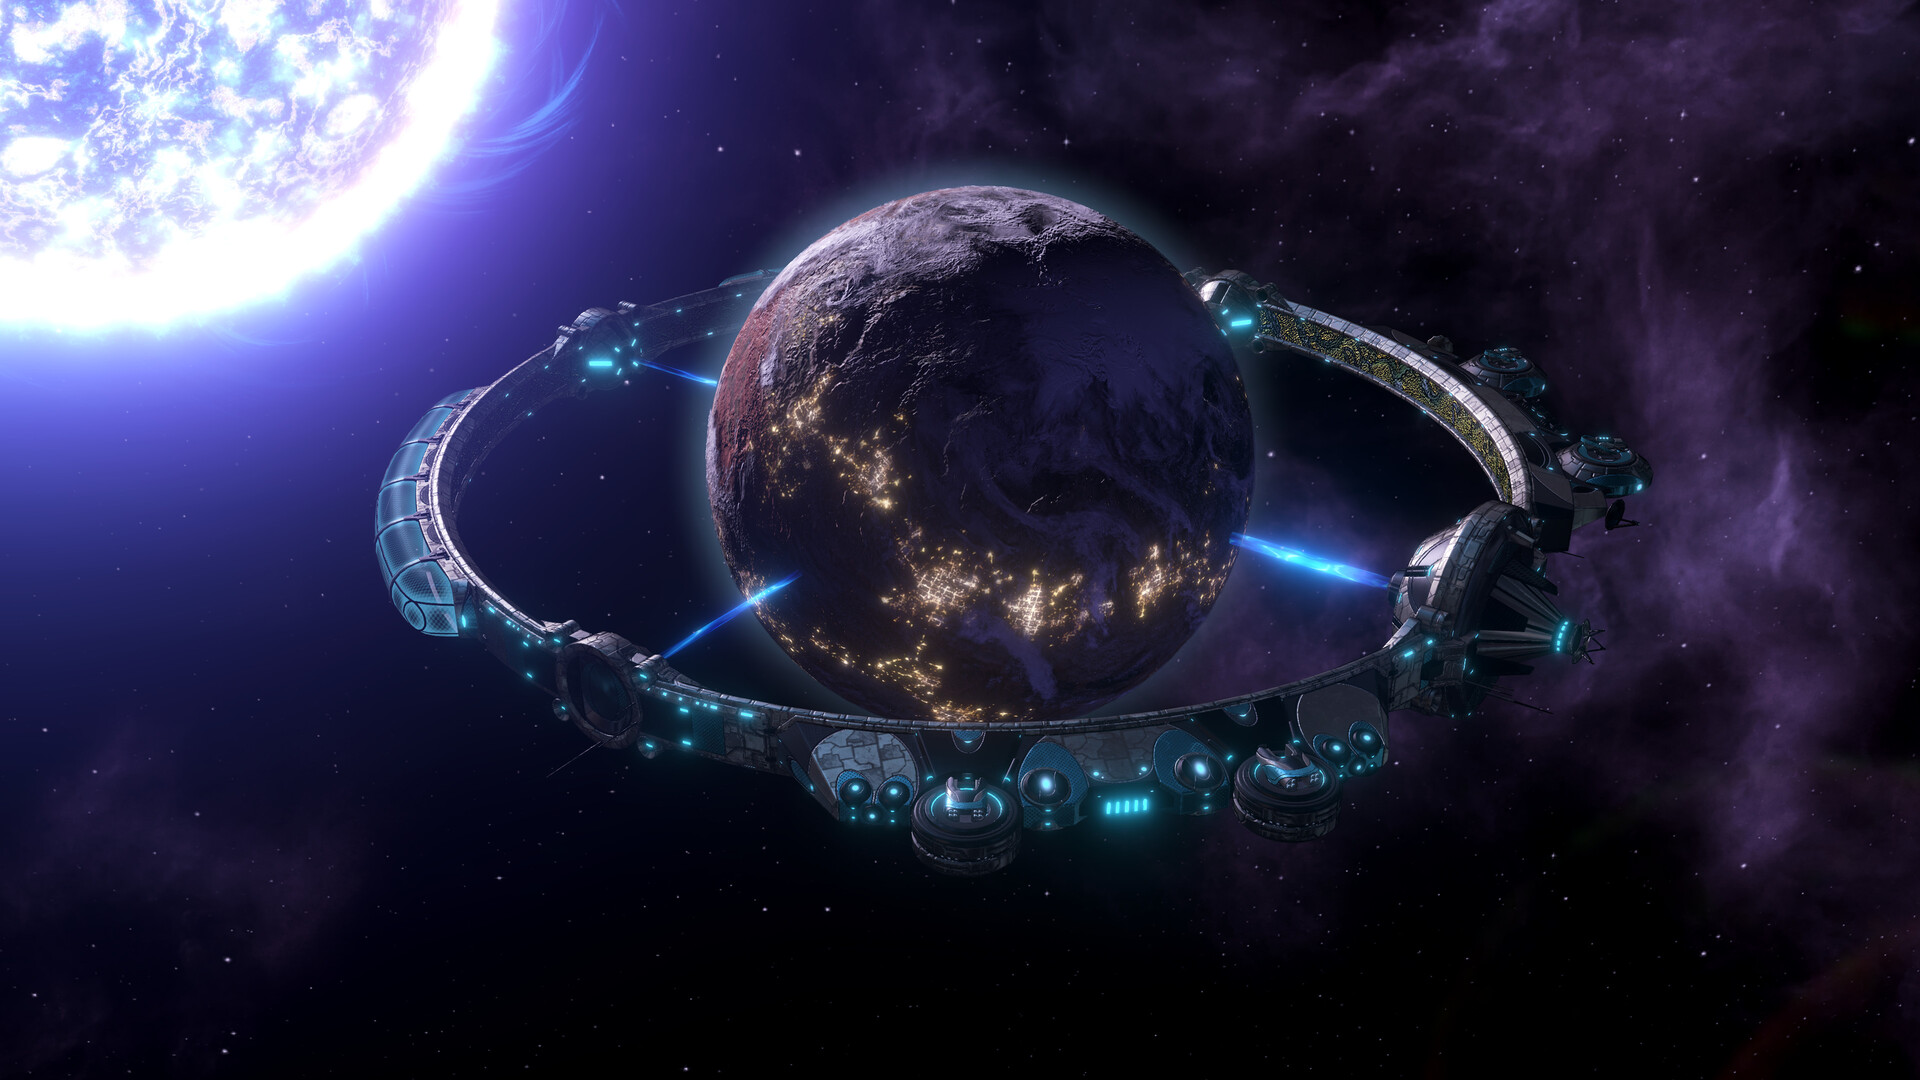 Overlord add-on for Stellaris will be released on May 12